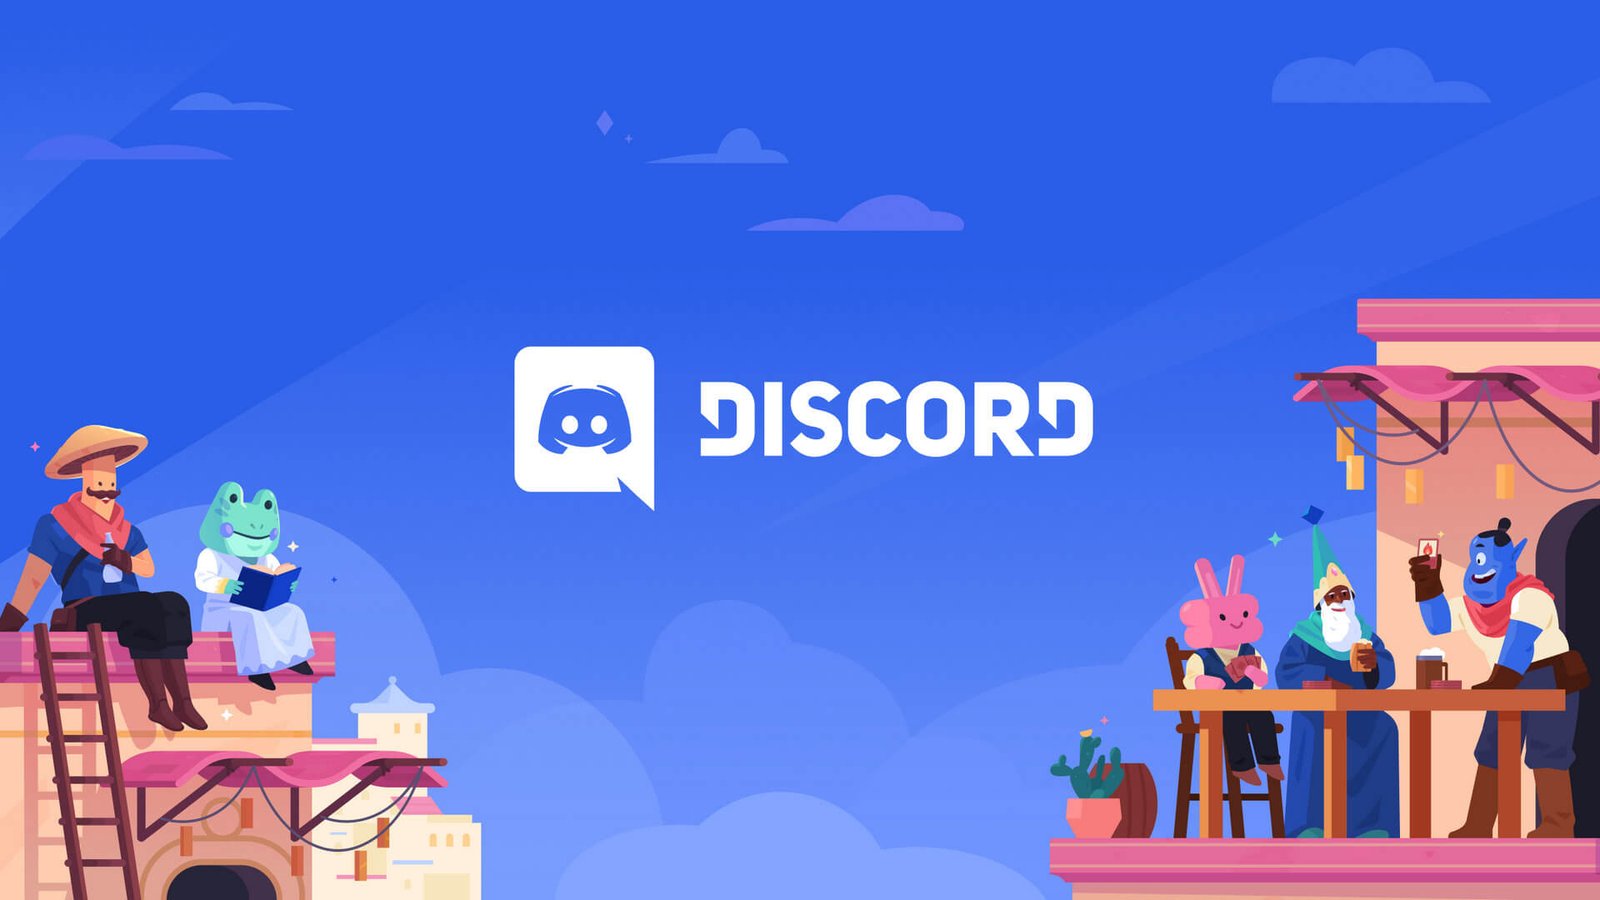 Discord aged 2020 account 